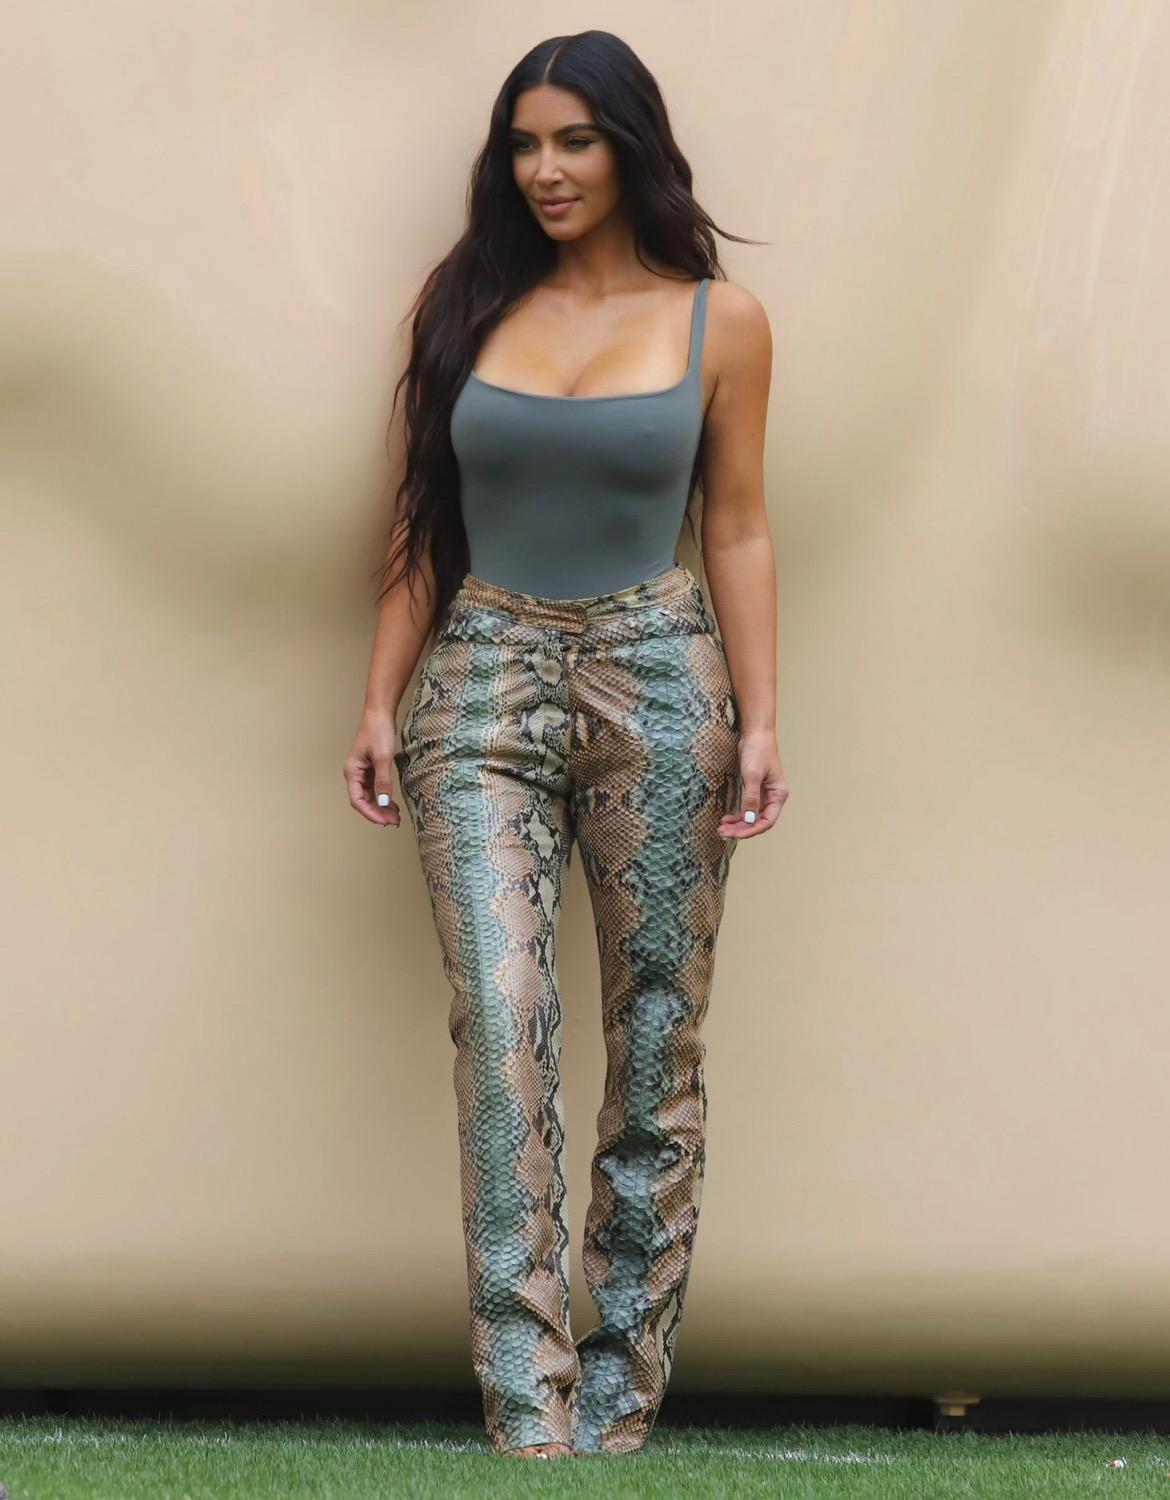 Presenting These python pants were designed by Tom Ford for Gucci, released in S/S 2000. As seen on Kim Kardashian, Scottish singer Lulu, Kate Winslet, and more! Kim Kardashian wore a version of these infamous pants on season 20 episode 8 of KUWTK,